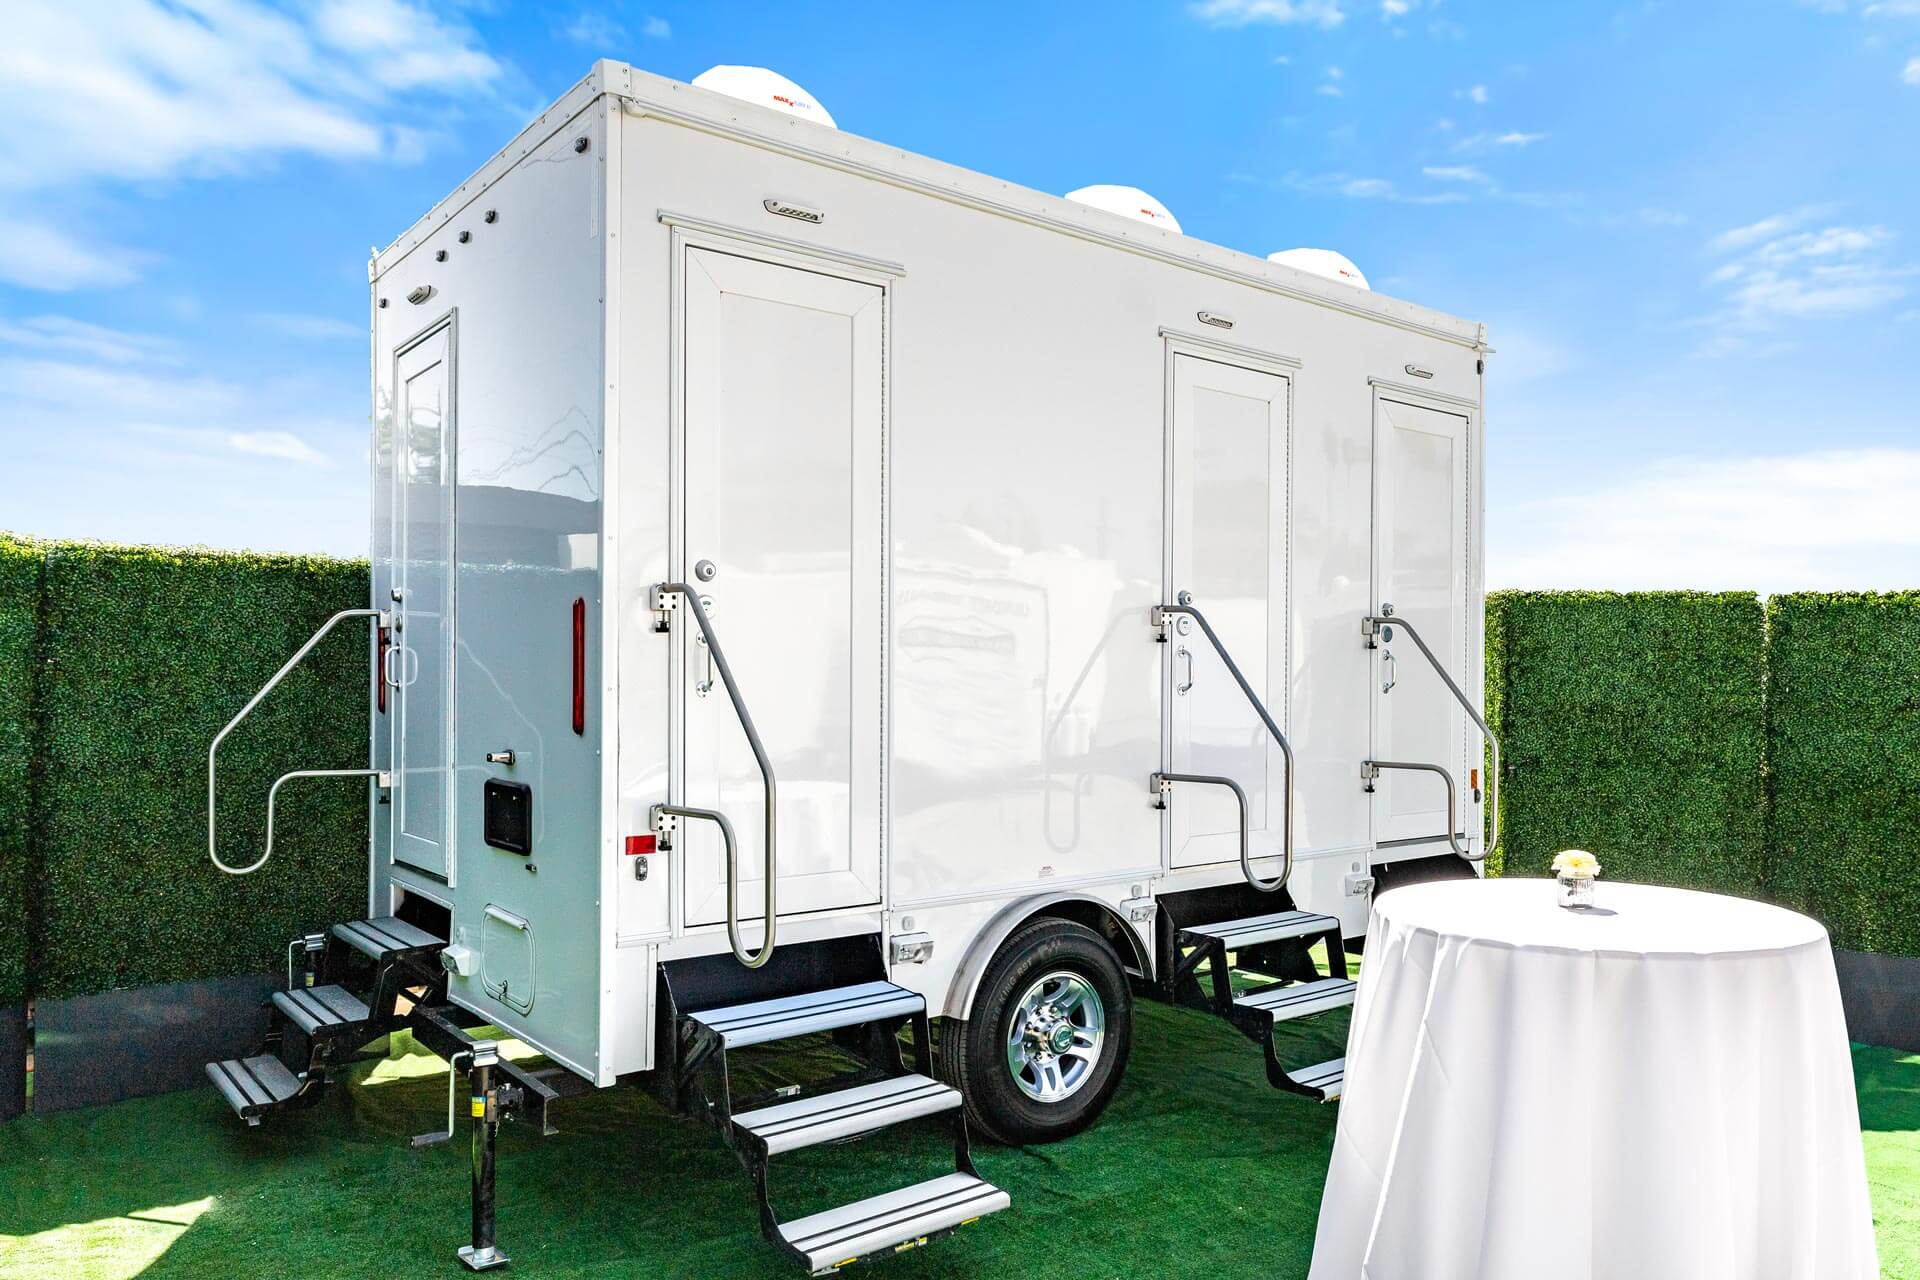 Luxury Restroom Trailers: The Optimal Choice for Outdoor Event Restrooms in Porta Potty Rental Dallas TX